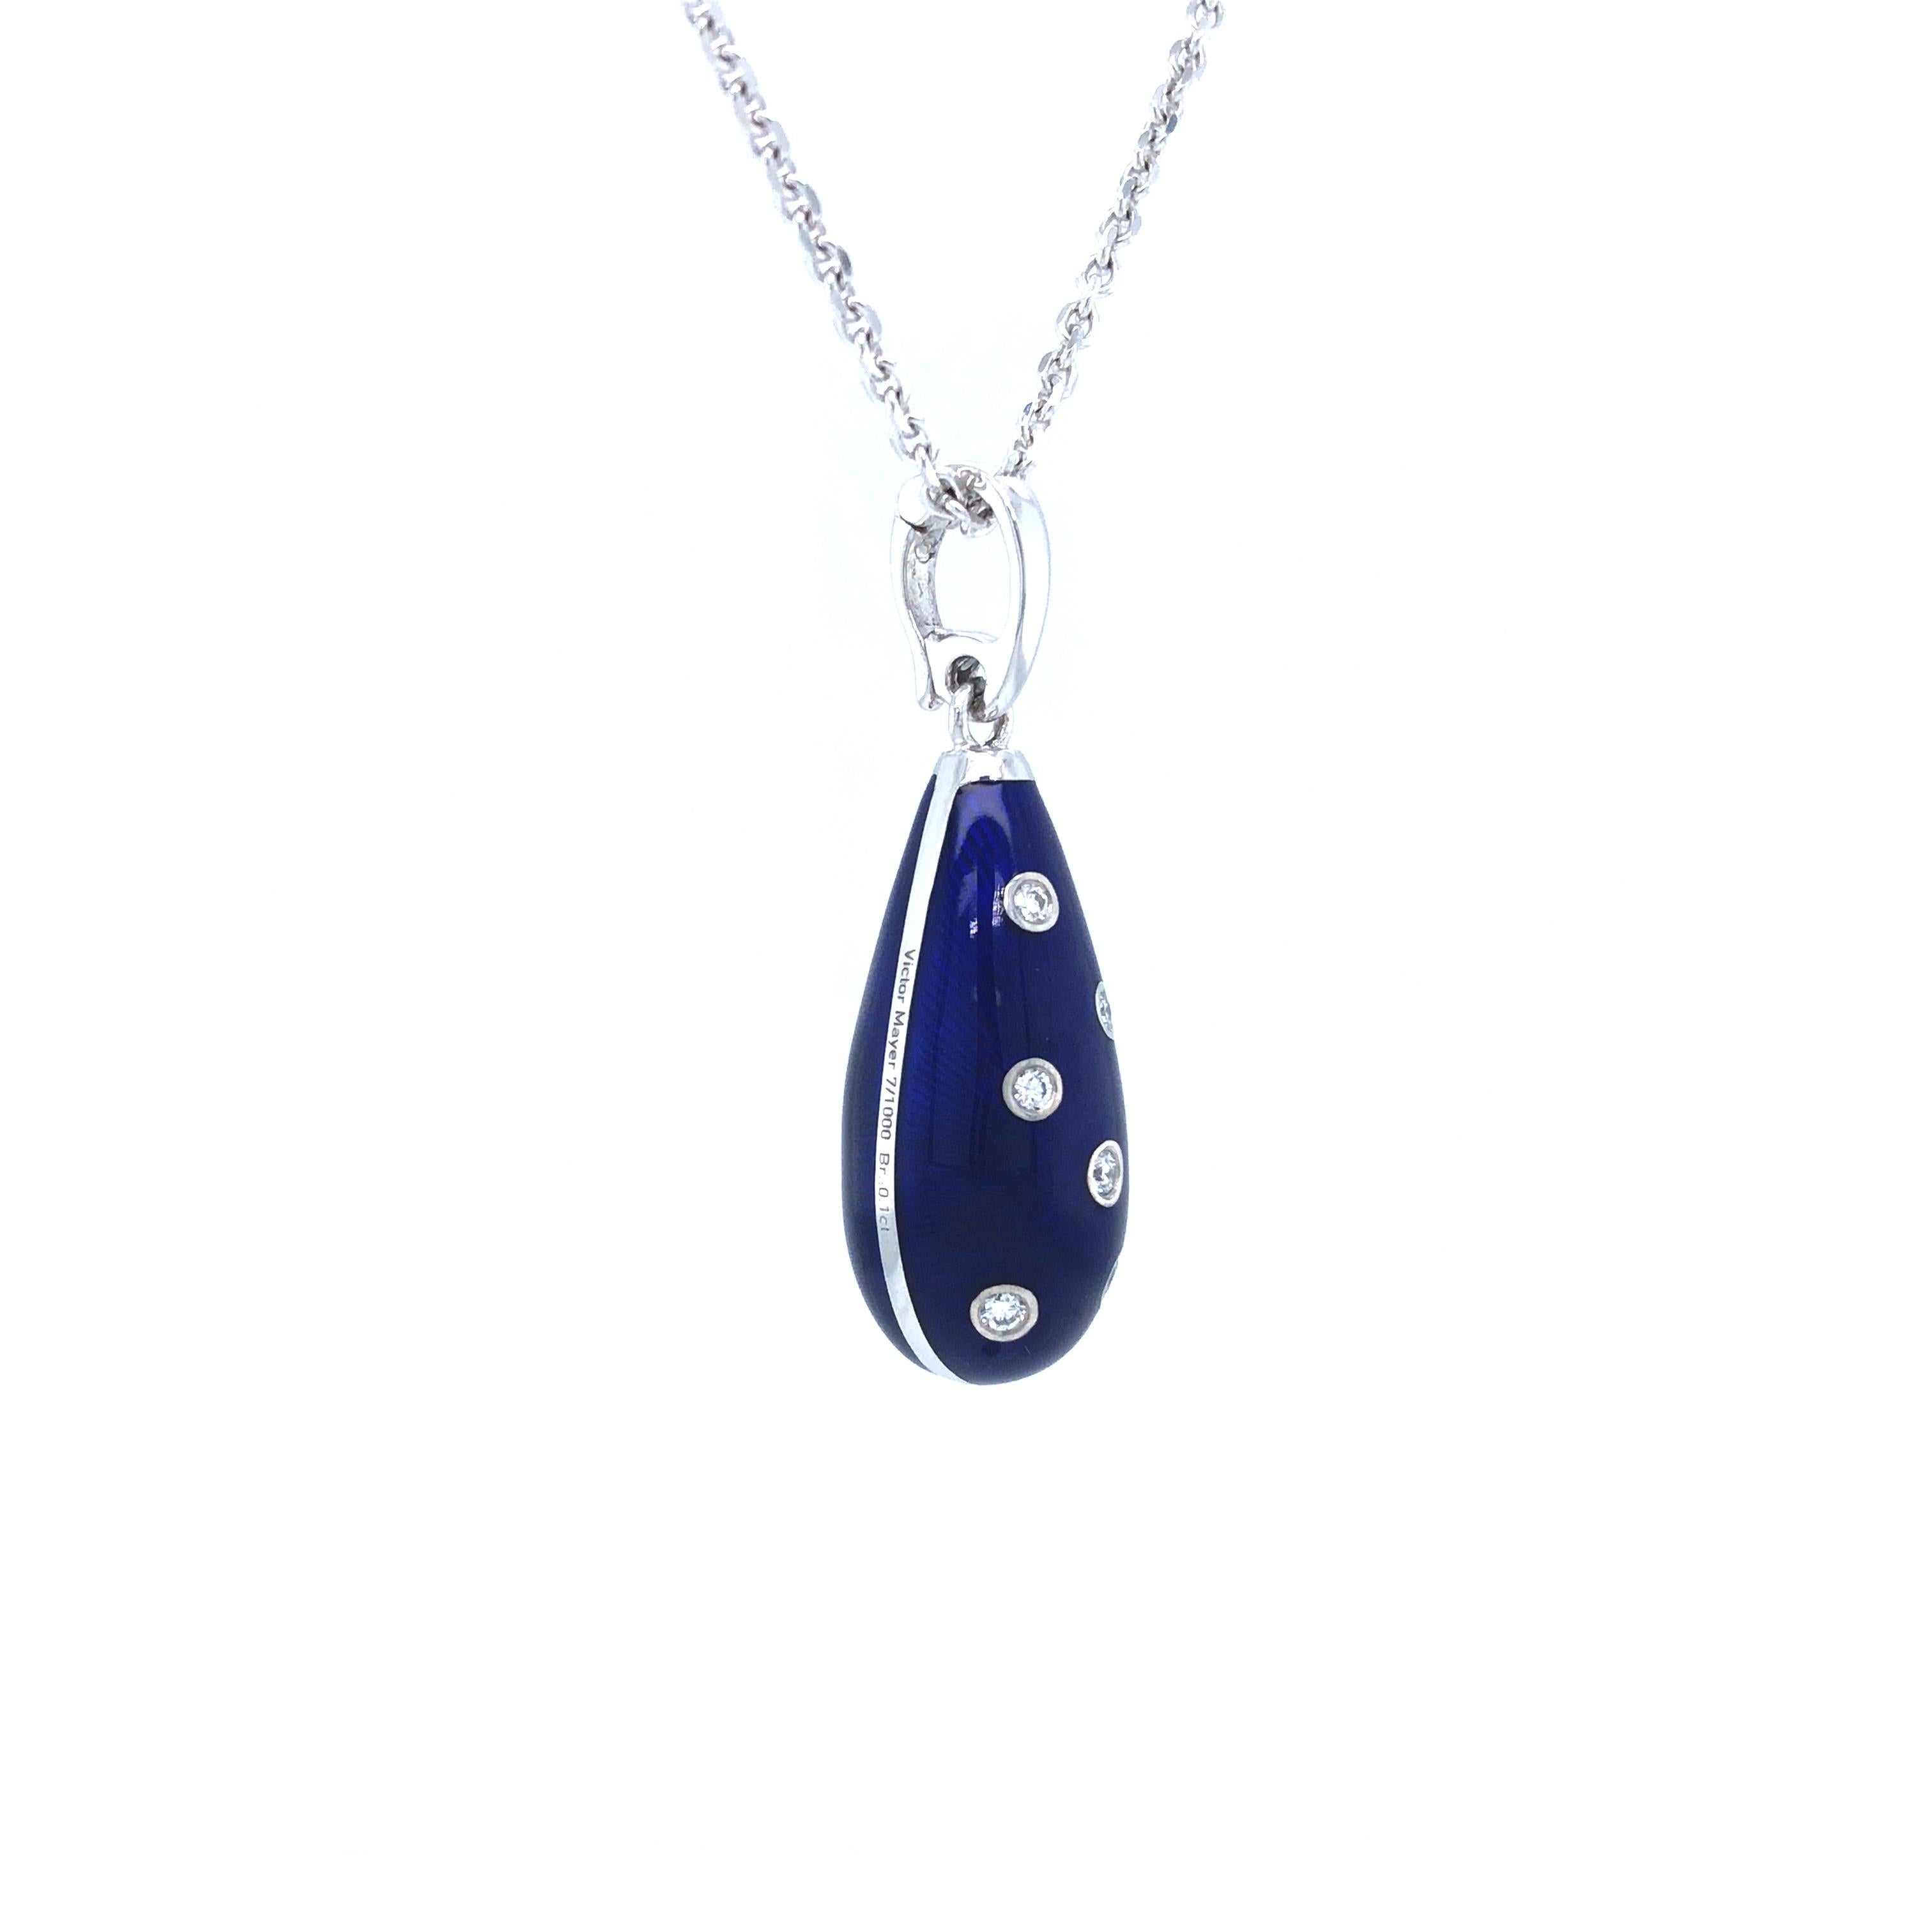 Victor Mayer drop pendant necklace, 18k White Gold, Dew Drop collection, royal blue vitreous enamel, 6 diamonds, total 0.1 ct G VS brilliant cut

About the creator Victor Mayer
Victor Mayer is internationally renowned for elegant timeless designs